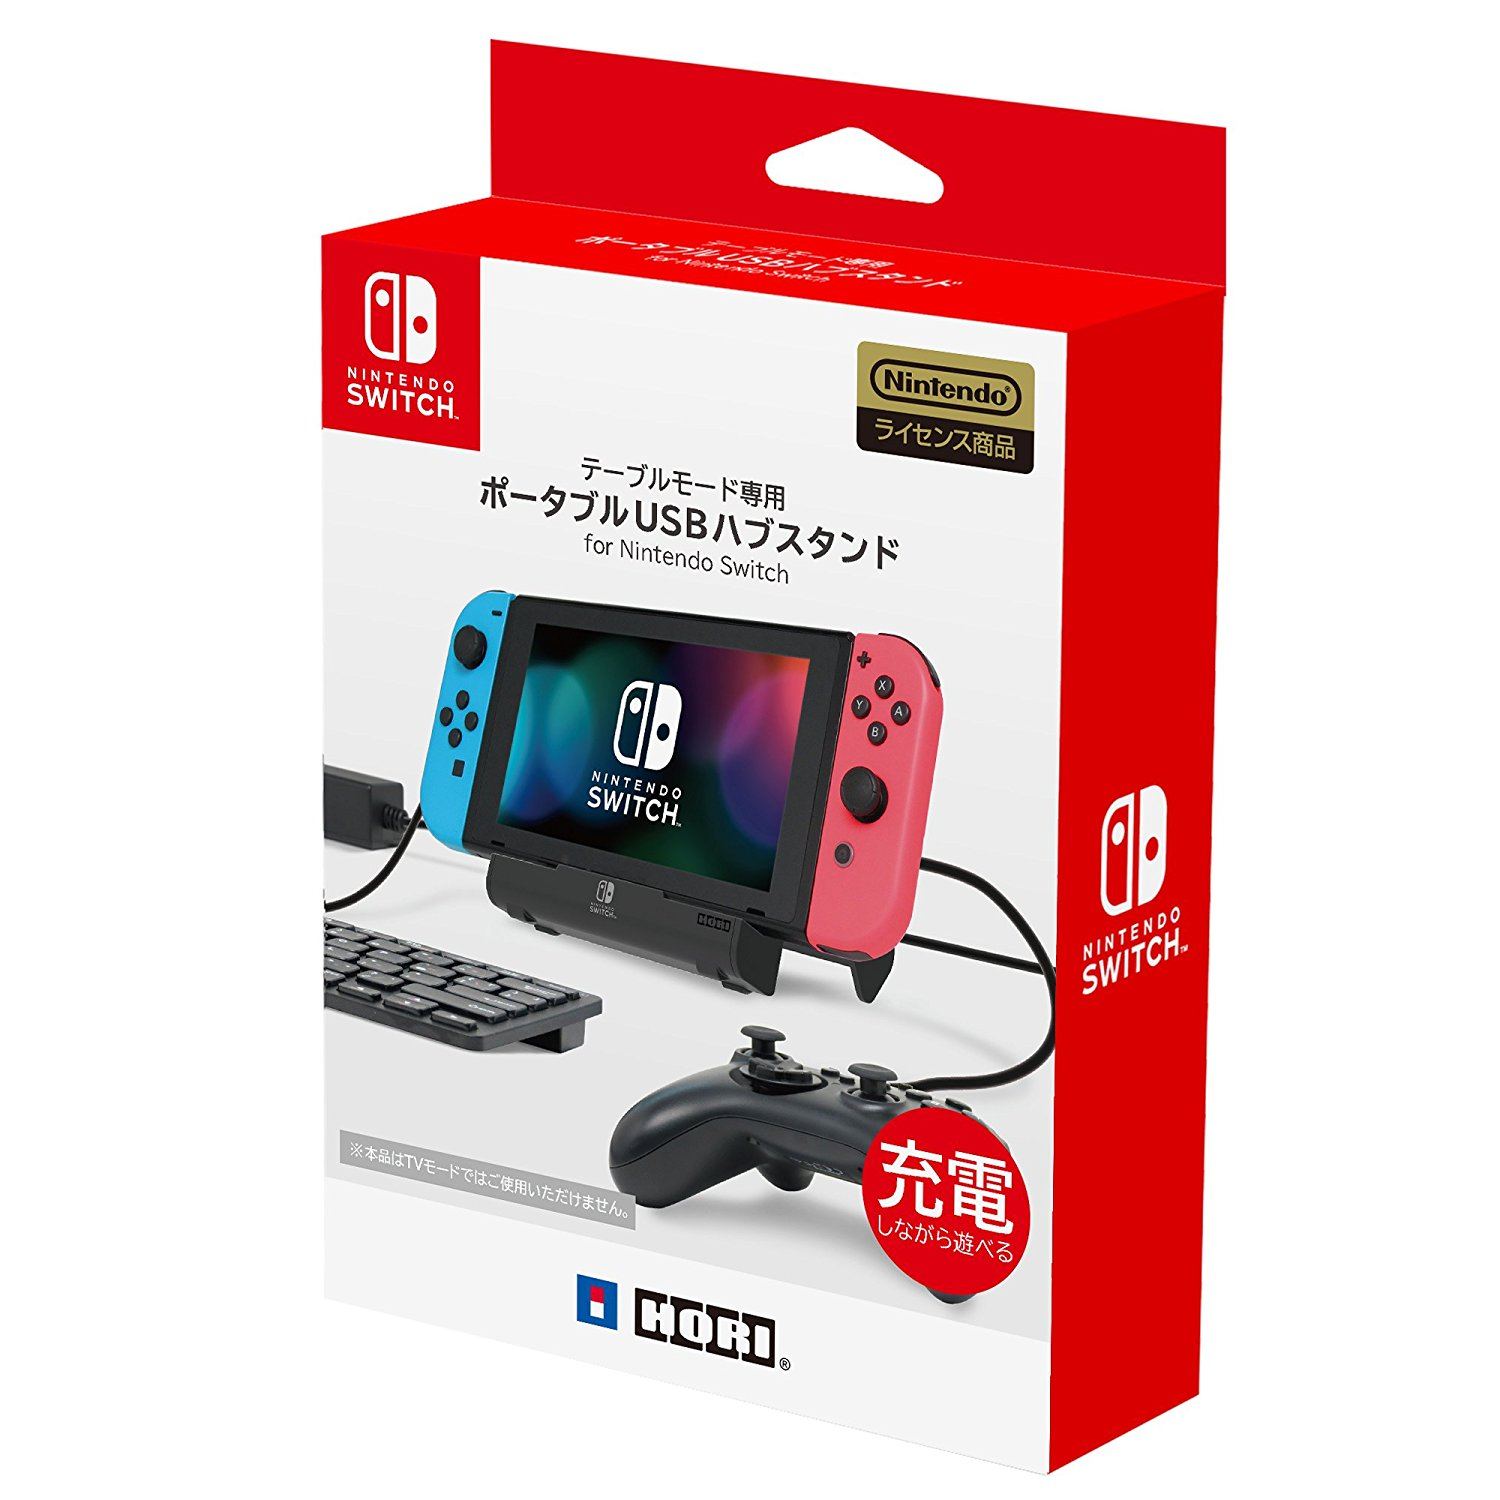 Portable Table Mode Usb Hub Stand For Nintendo Switch